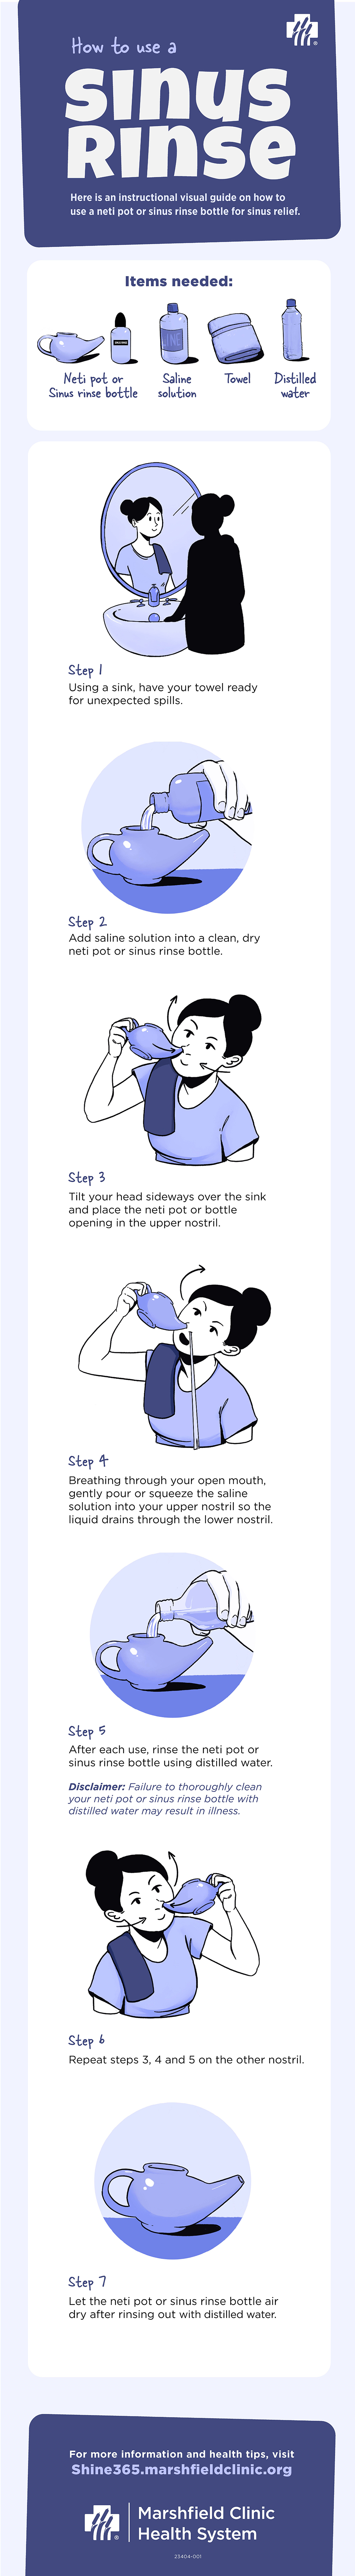 Infographic on how to use a neti pot